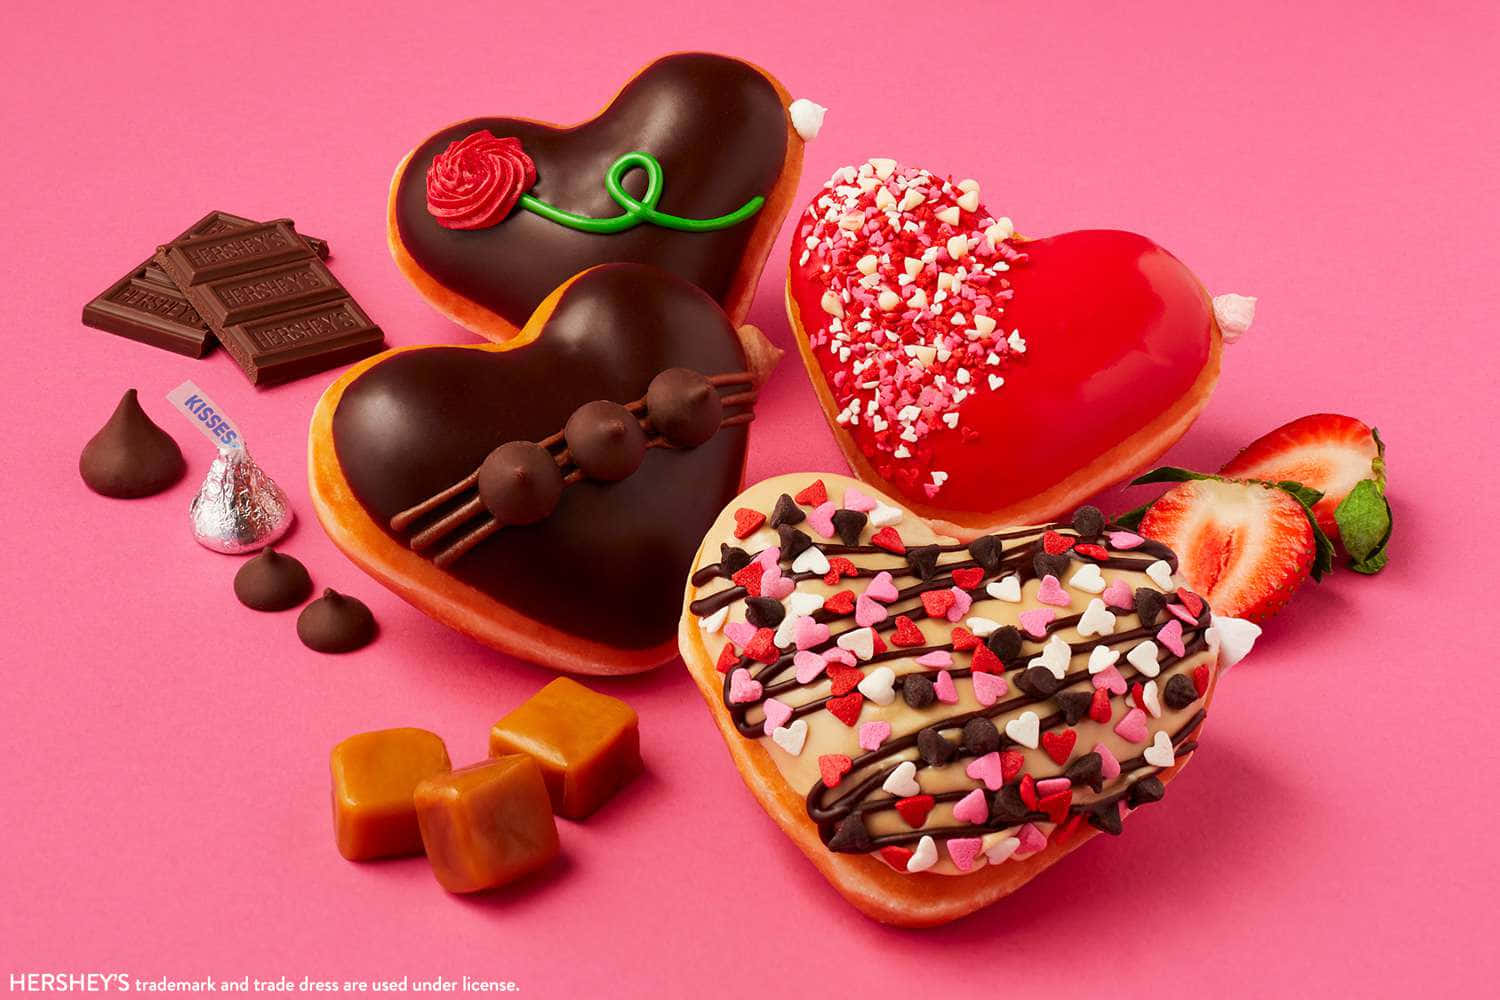 Heart Donuts Flavors Valentine's Day Pictures 1500 x 1000 Picture